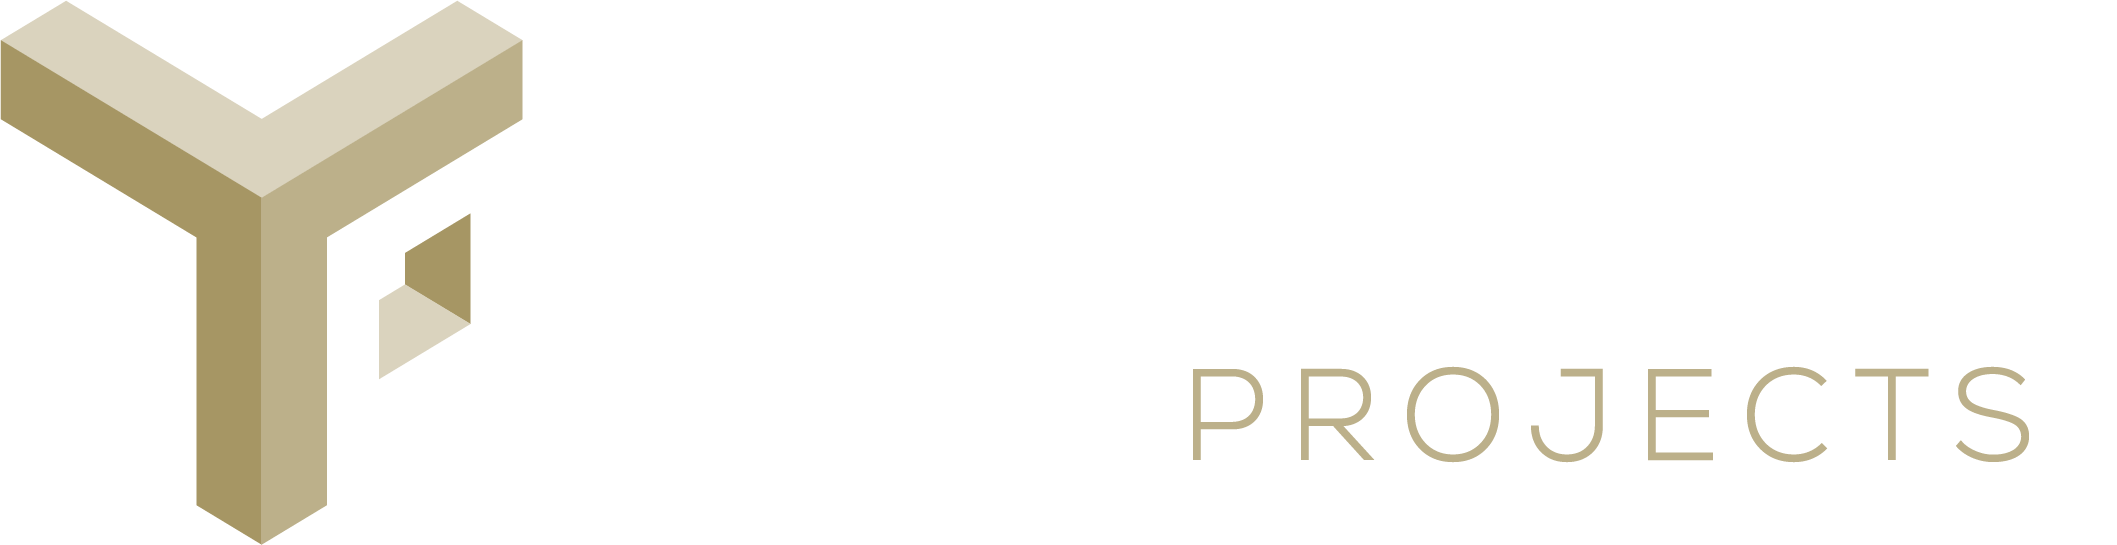 Odyssey Projects Australia - Custom Homes & Interiors in Perth